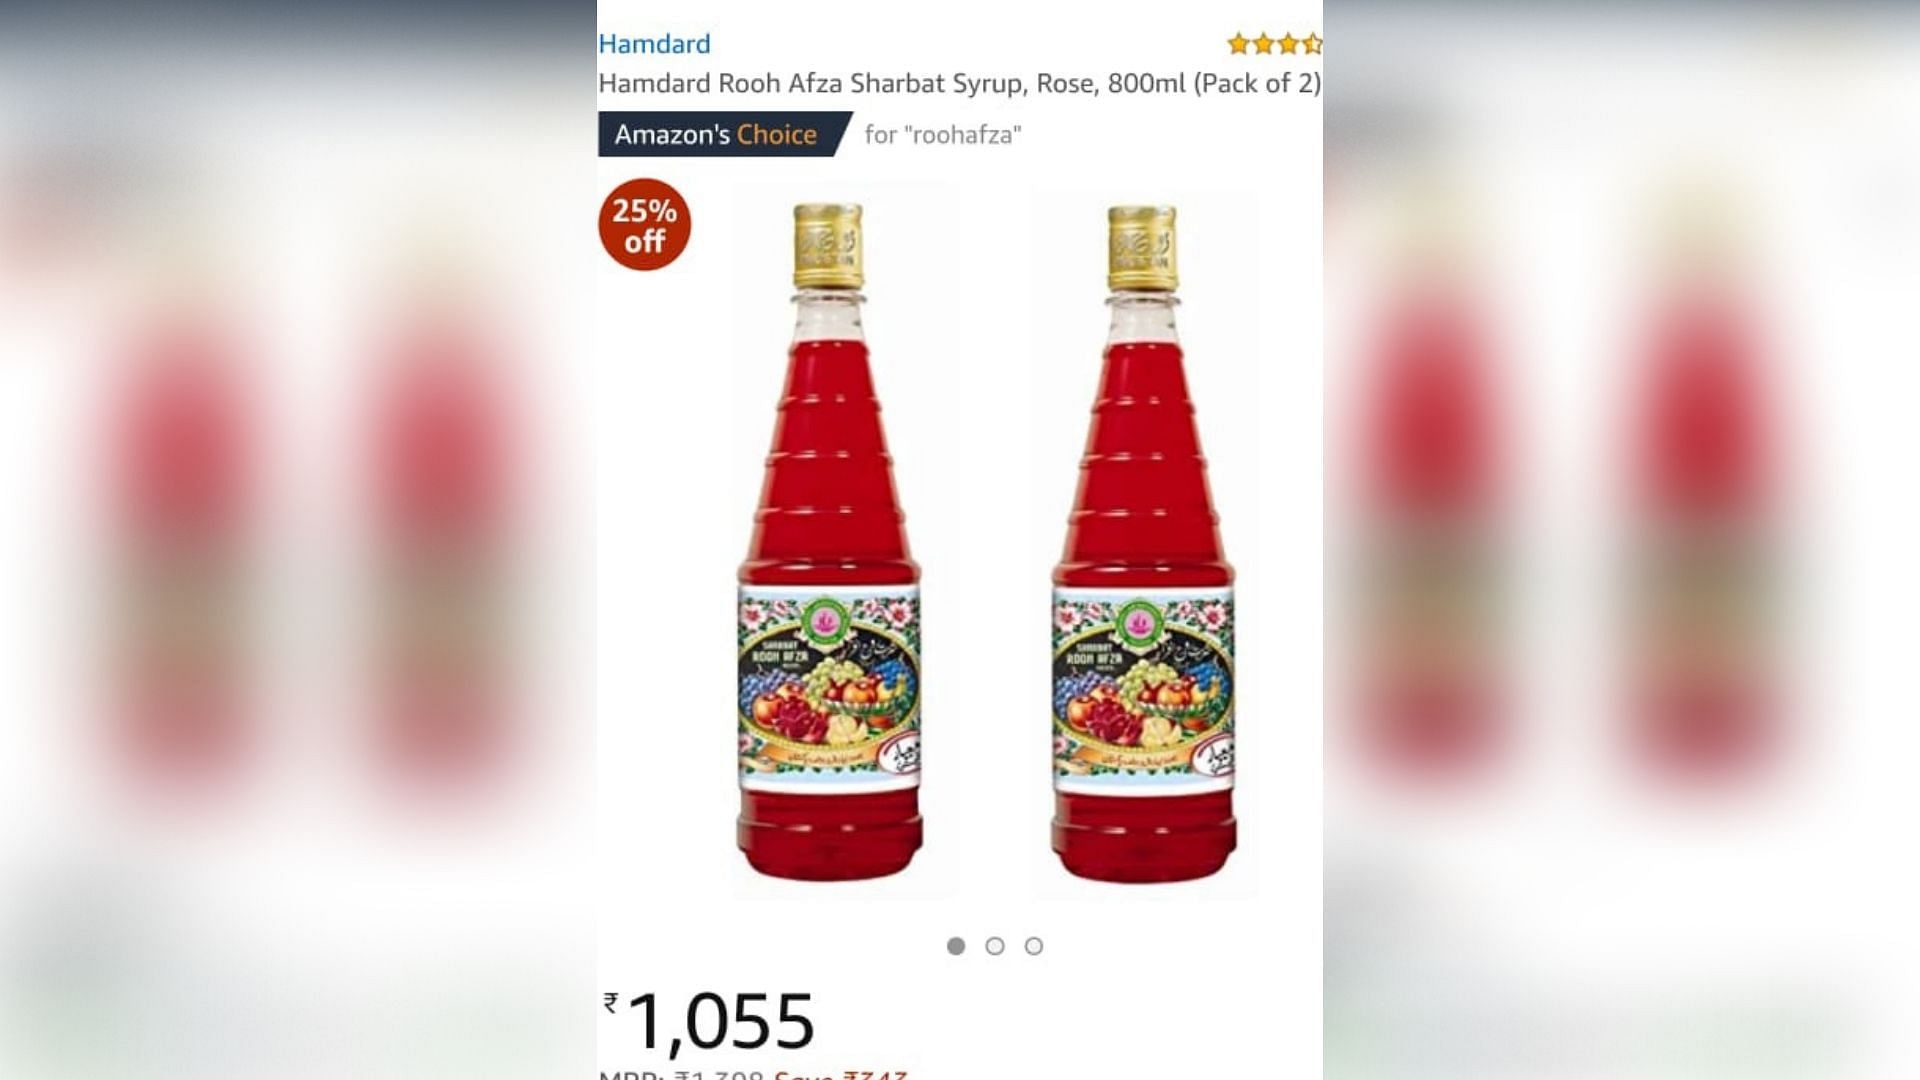 The supply of the rose-flavoured syrup was reported to be in shortage recently.